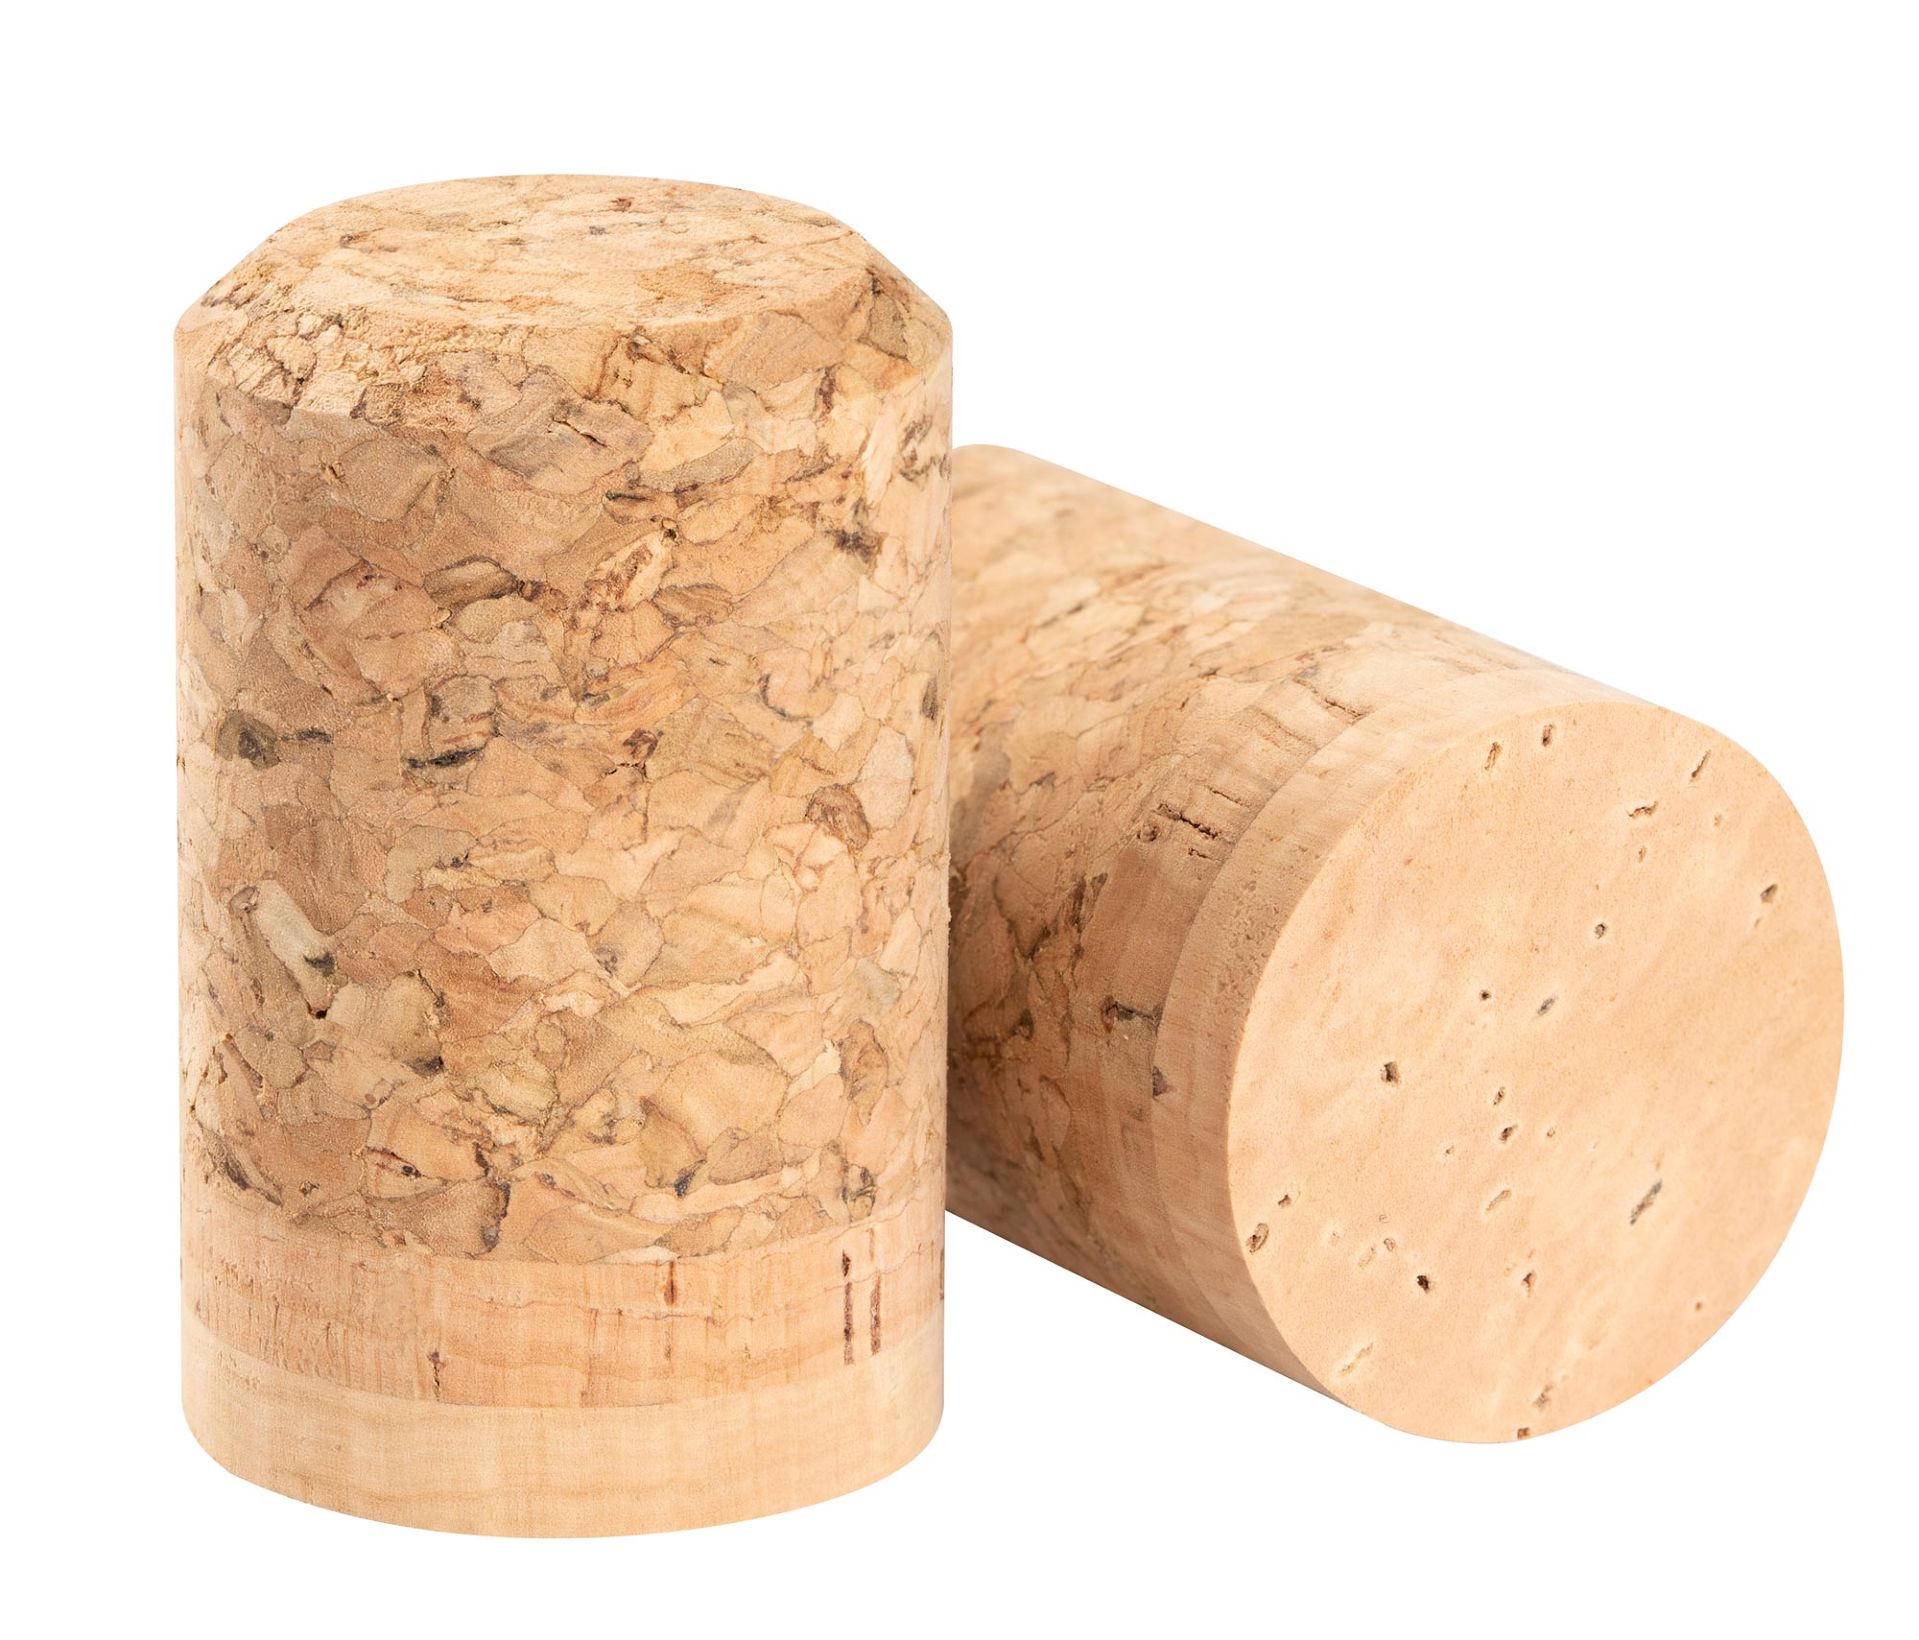 Agglomerated cork with discs